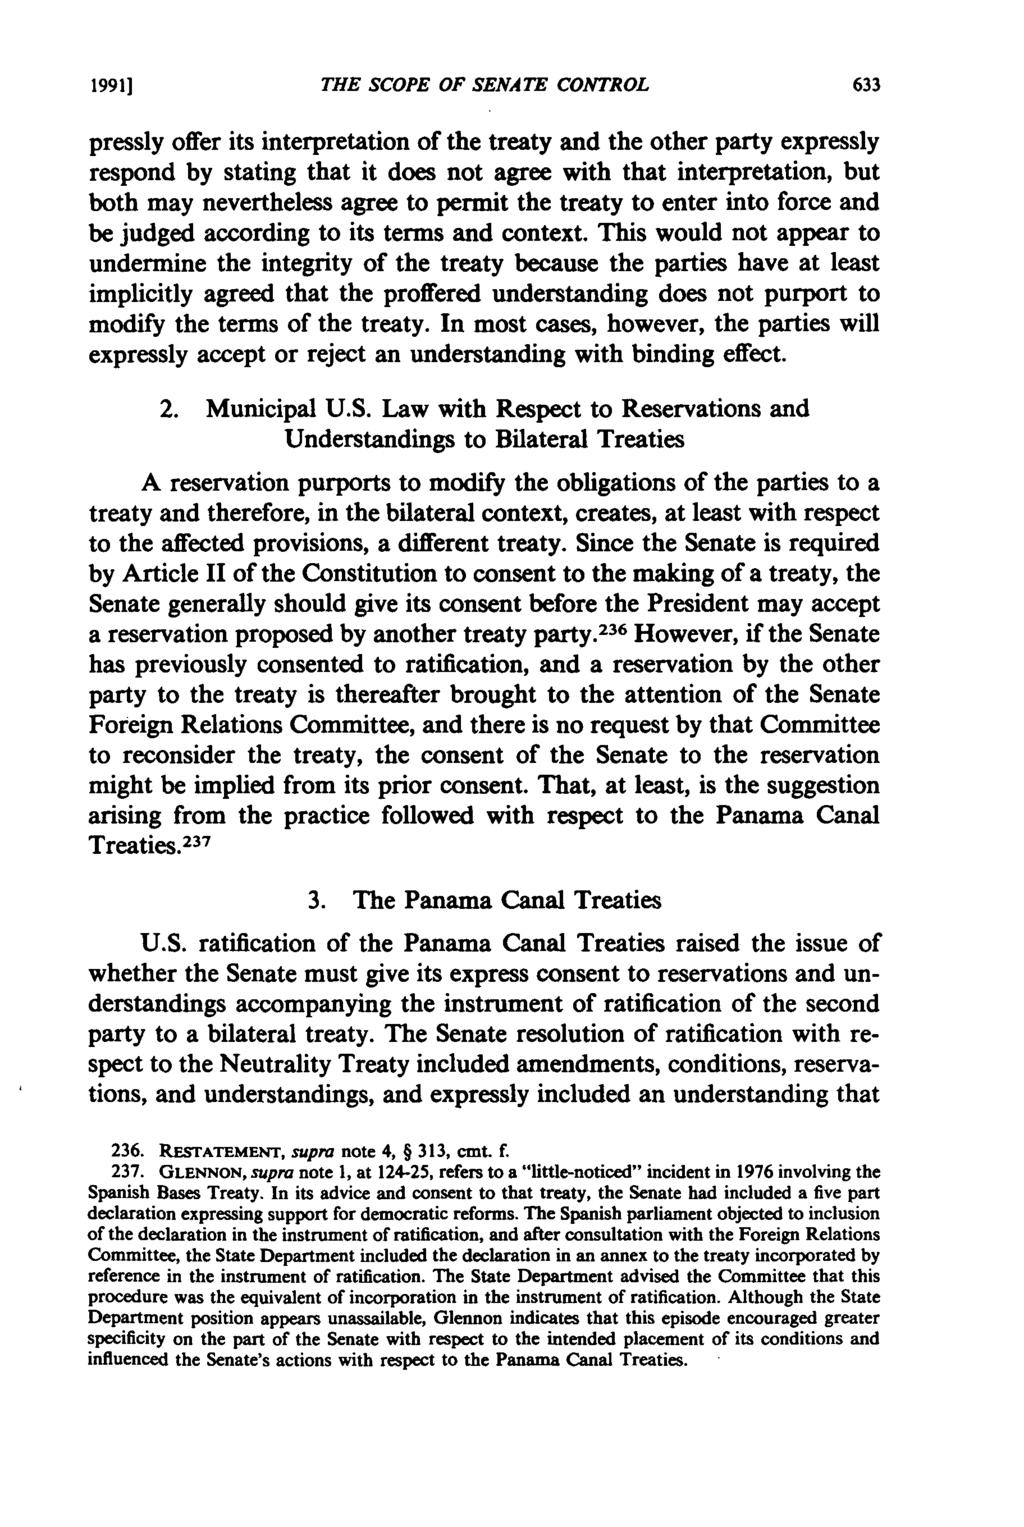 1991] THE SCOPE OF SENATE CONTROL pressly offer its interpretation of the treaty and the other party expressly respond by stating that it does not agree with that interpretation, but both may